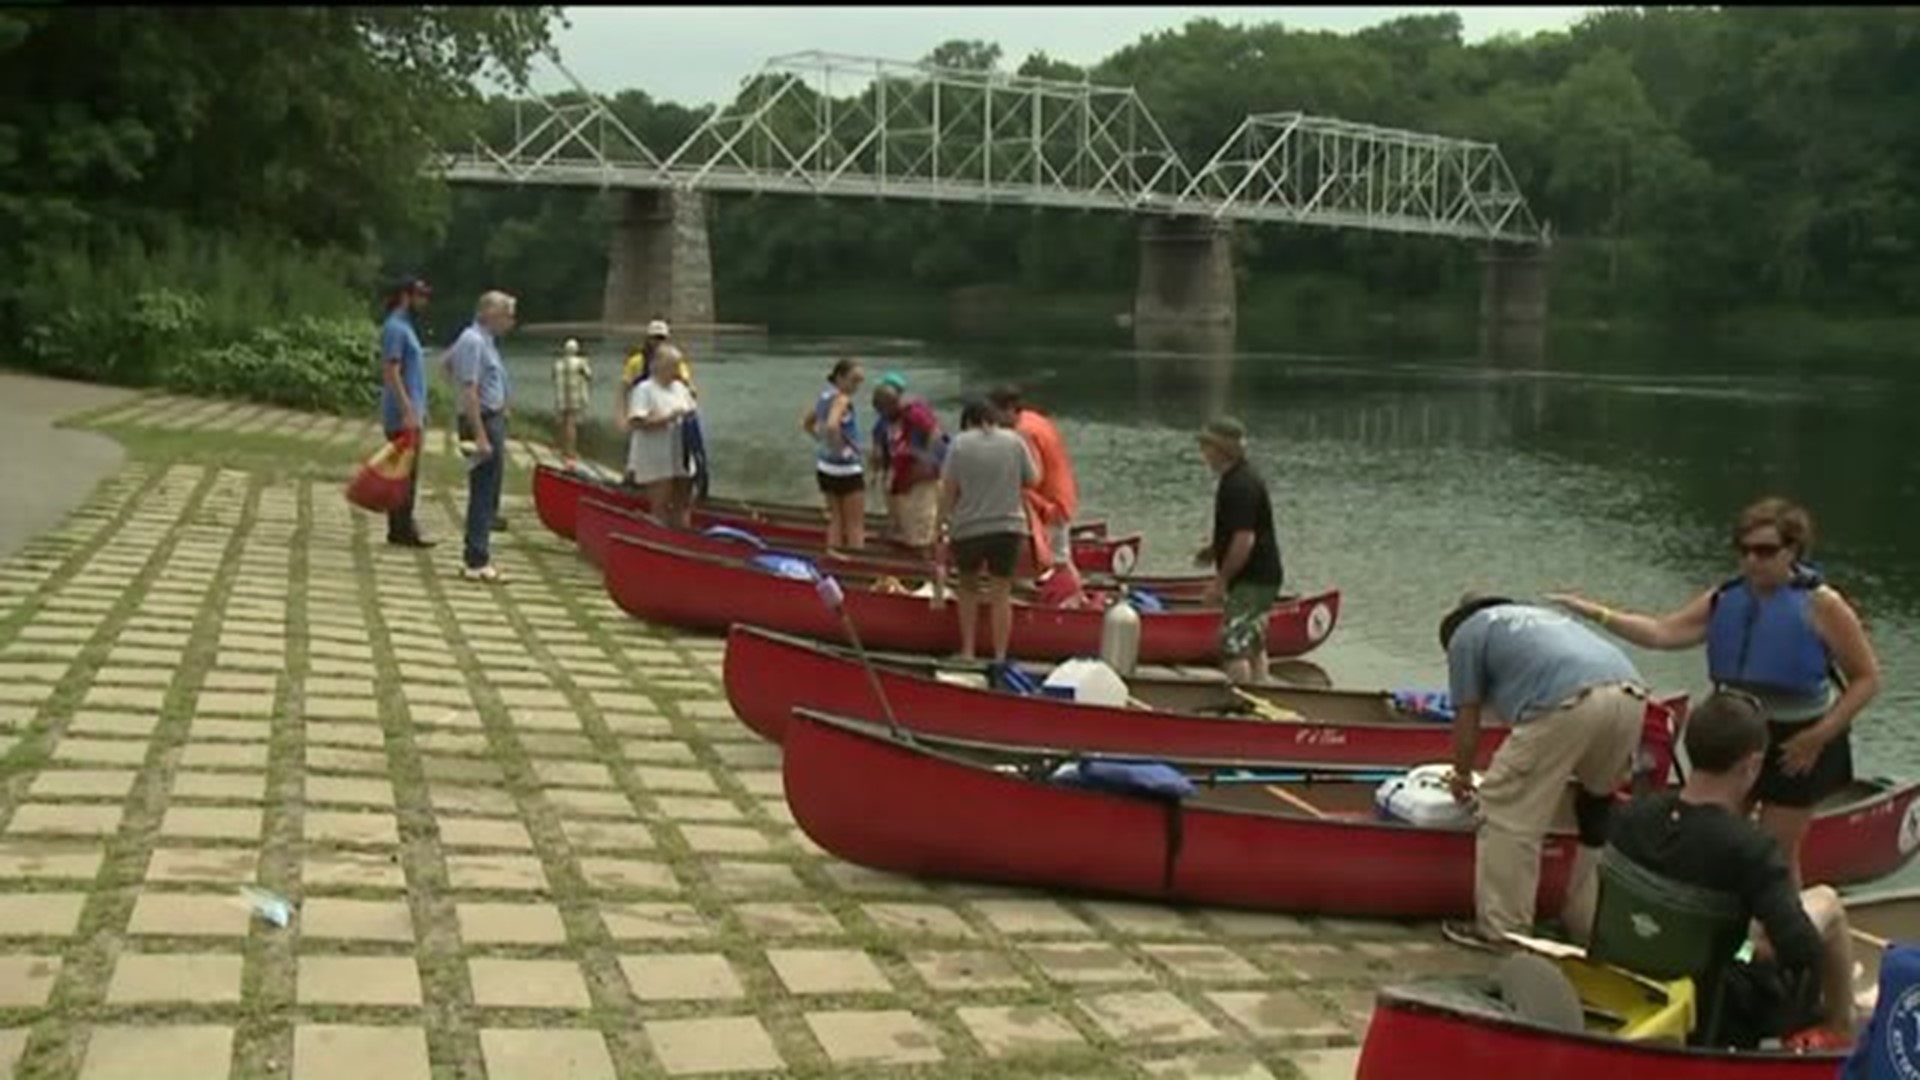 26th Annual River Cleanup Along the Delaware River